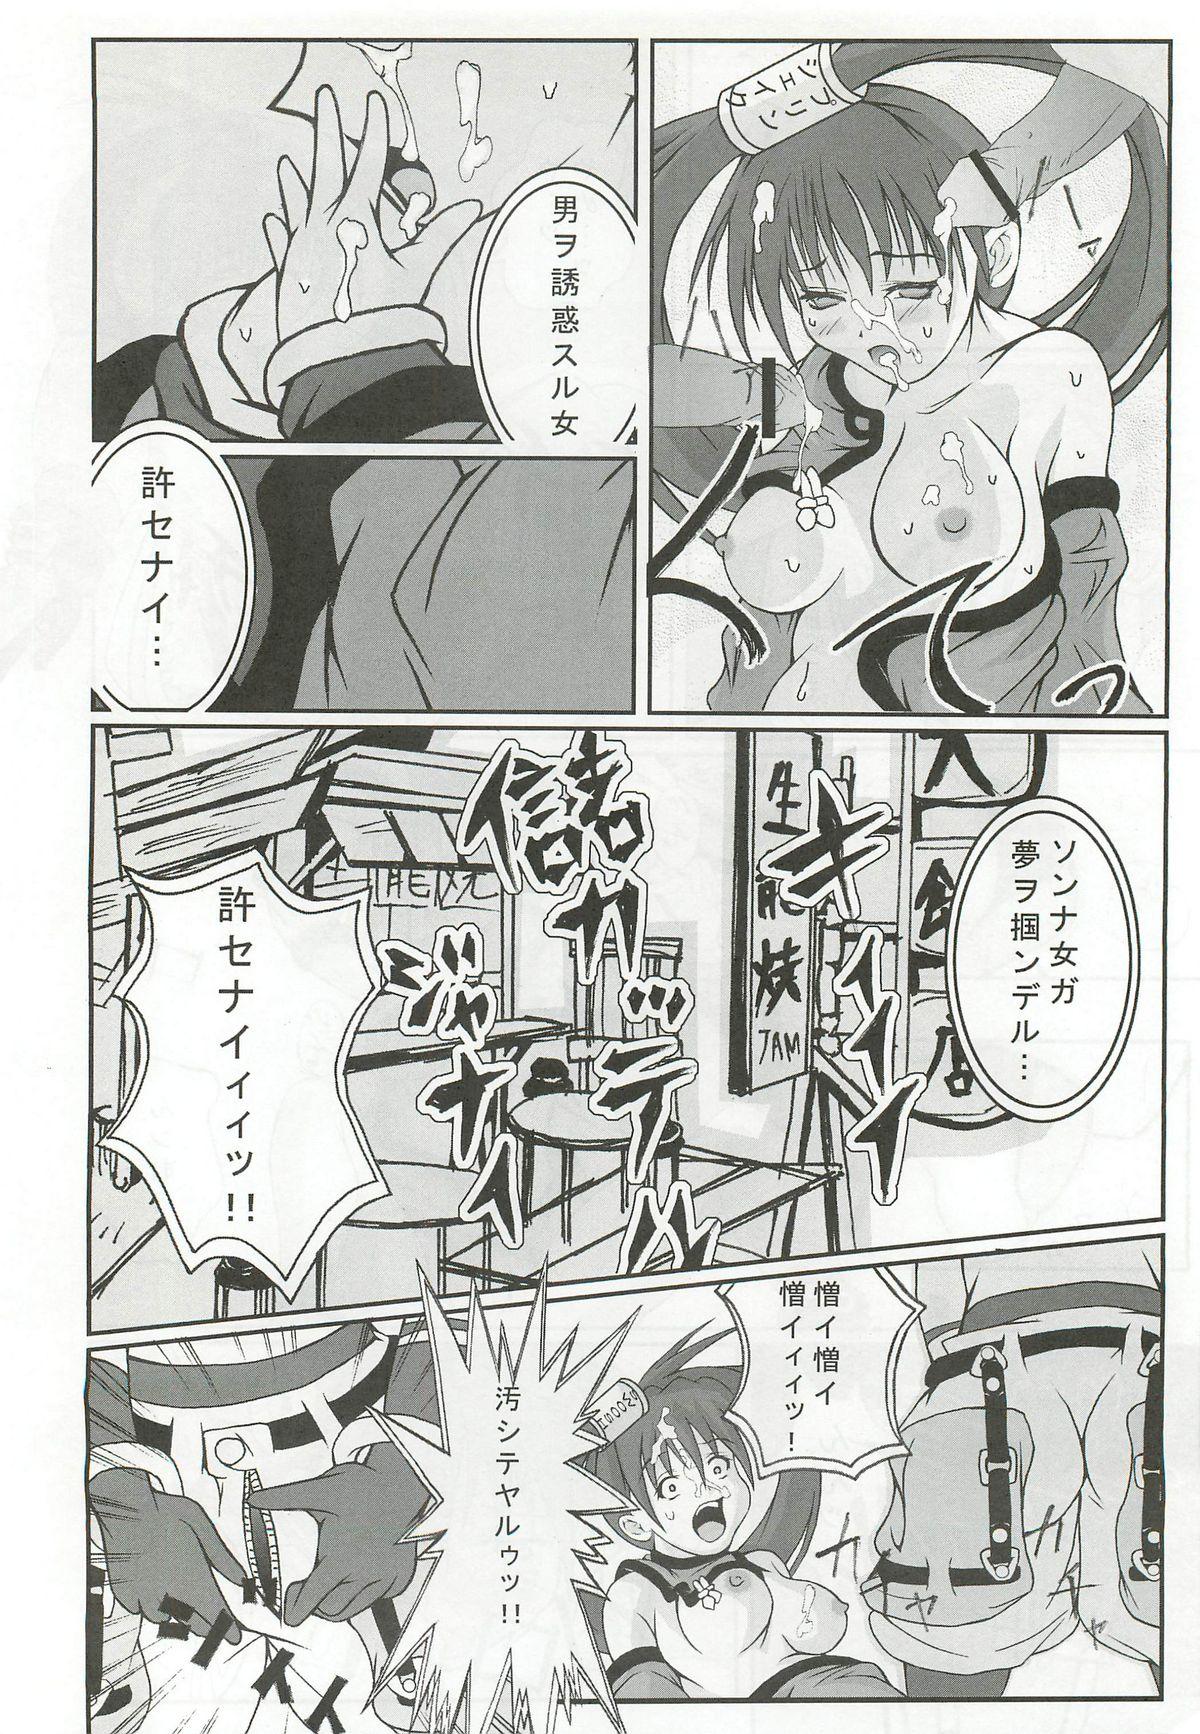 Vietnamese Passionless 2 - Guilty gear Affair - Page 7